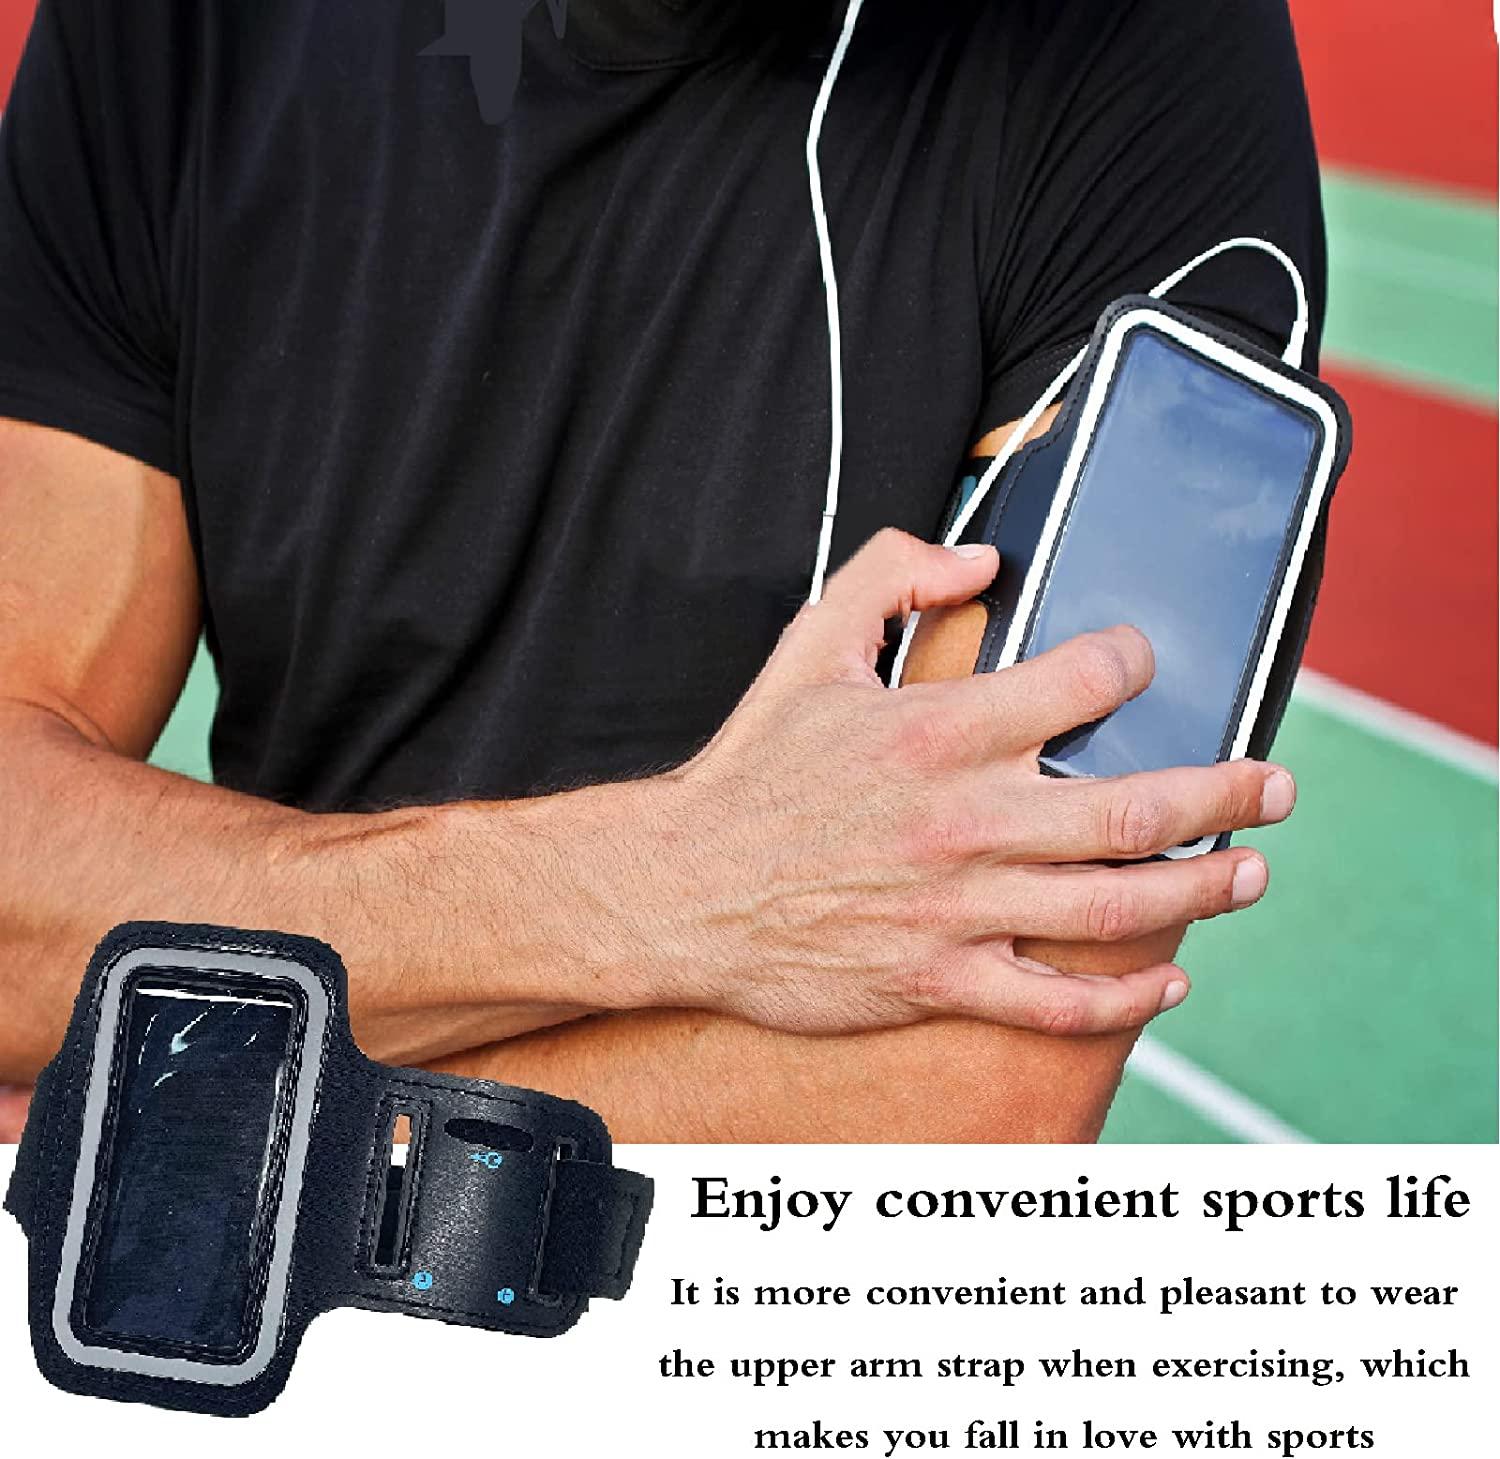 MP3 Player Running Exercise Armband, Adjustable Length Arm Band ,  Waterproof, Built-in Key Pocket, Headphone Slot, Sports Armband Protector  for MP3 Players from Agptek, Aiworth, Hotechs